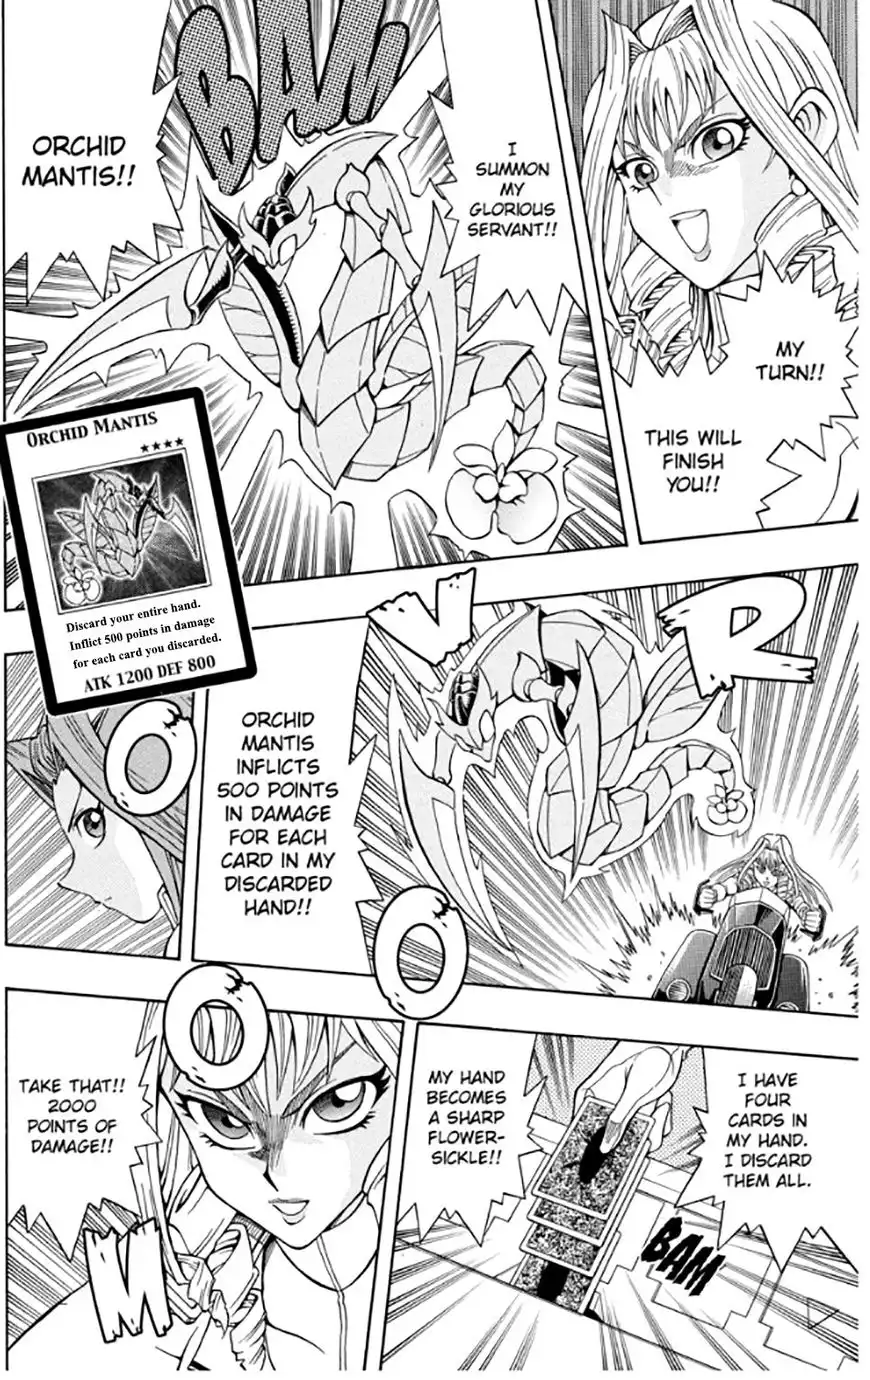 Yu-Gi-Oh! 5Ds - A Chapter 7